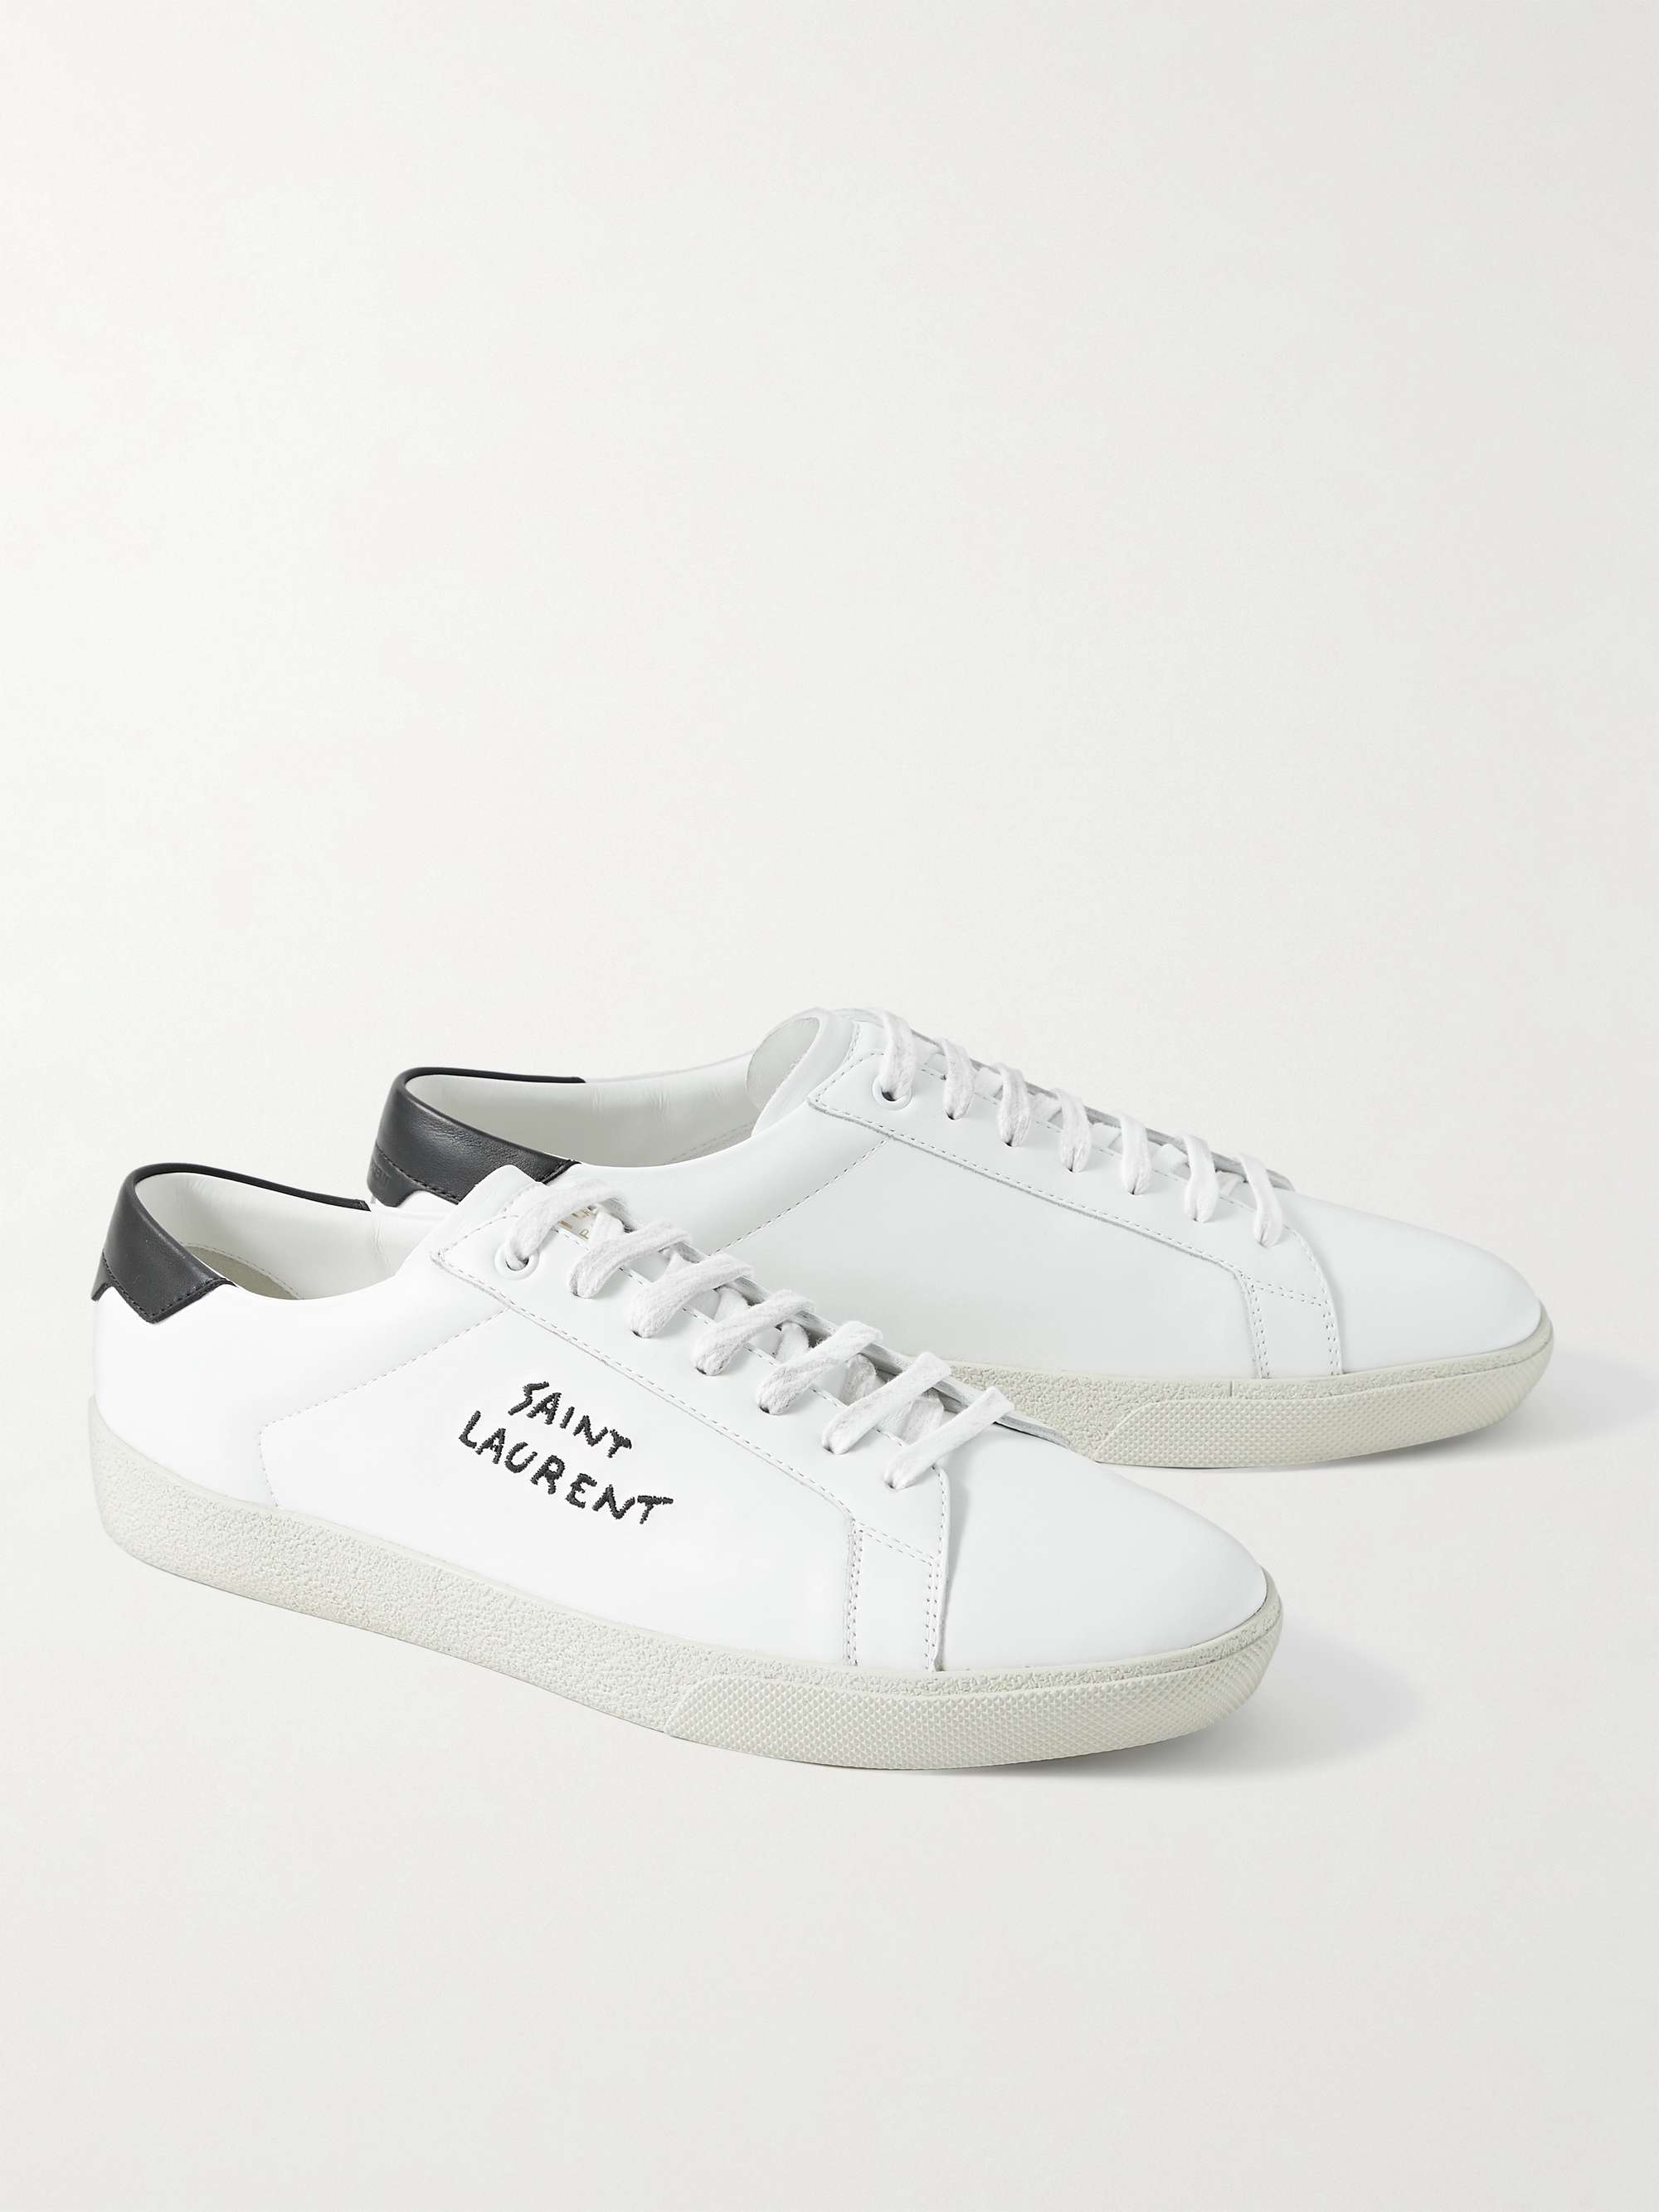 SAINT LAURENT SL/06 Court Classic Logo-Embroidered Leather Sneakers for Men  | MR PORTER